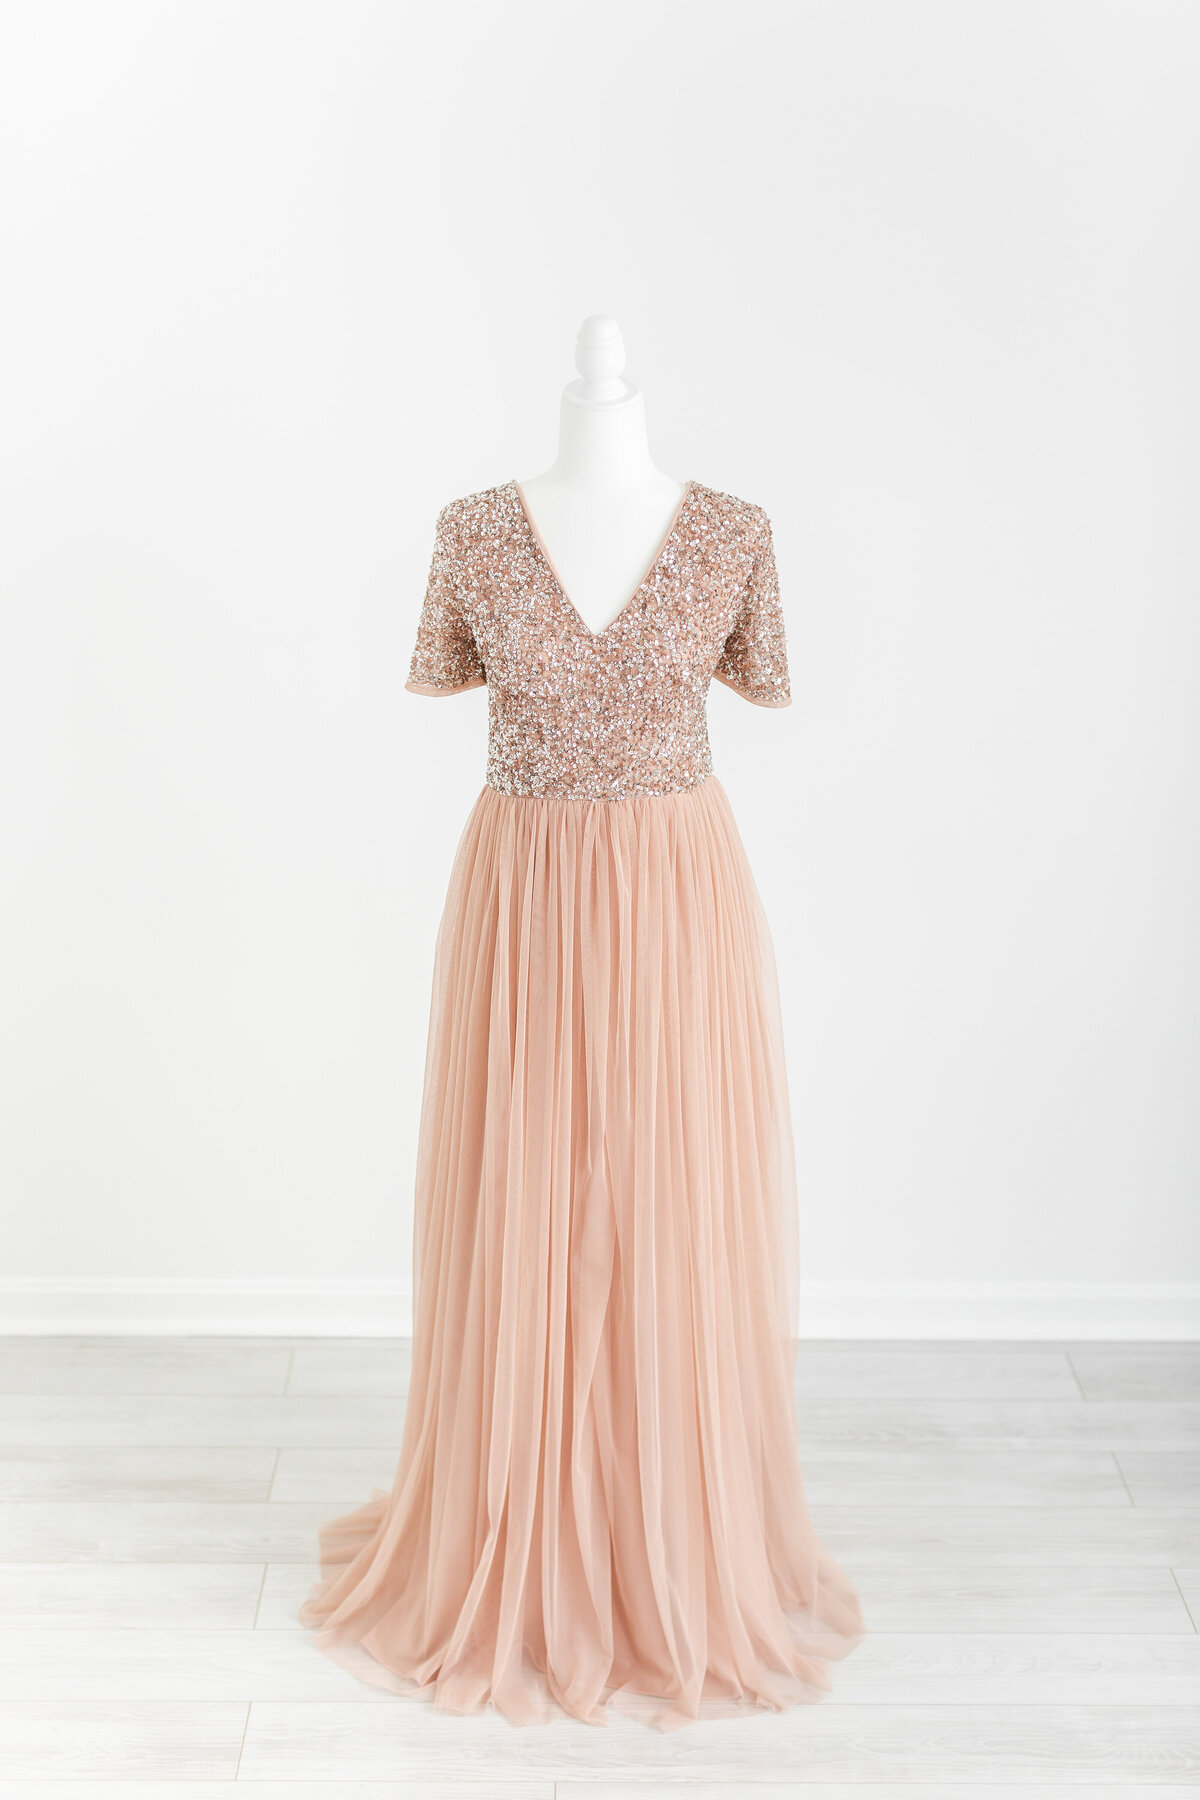 A pink maxi tulle dress with a sequin v neck bodice by DC Newborn Photographer